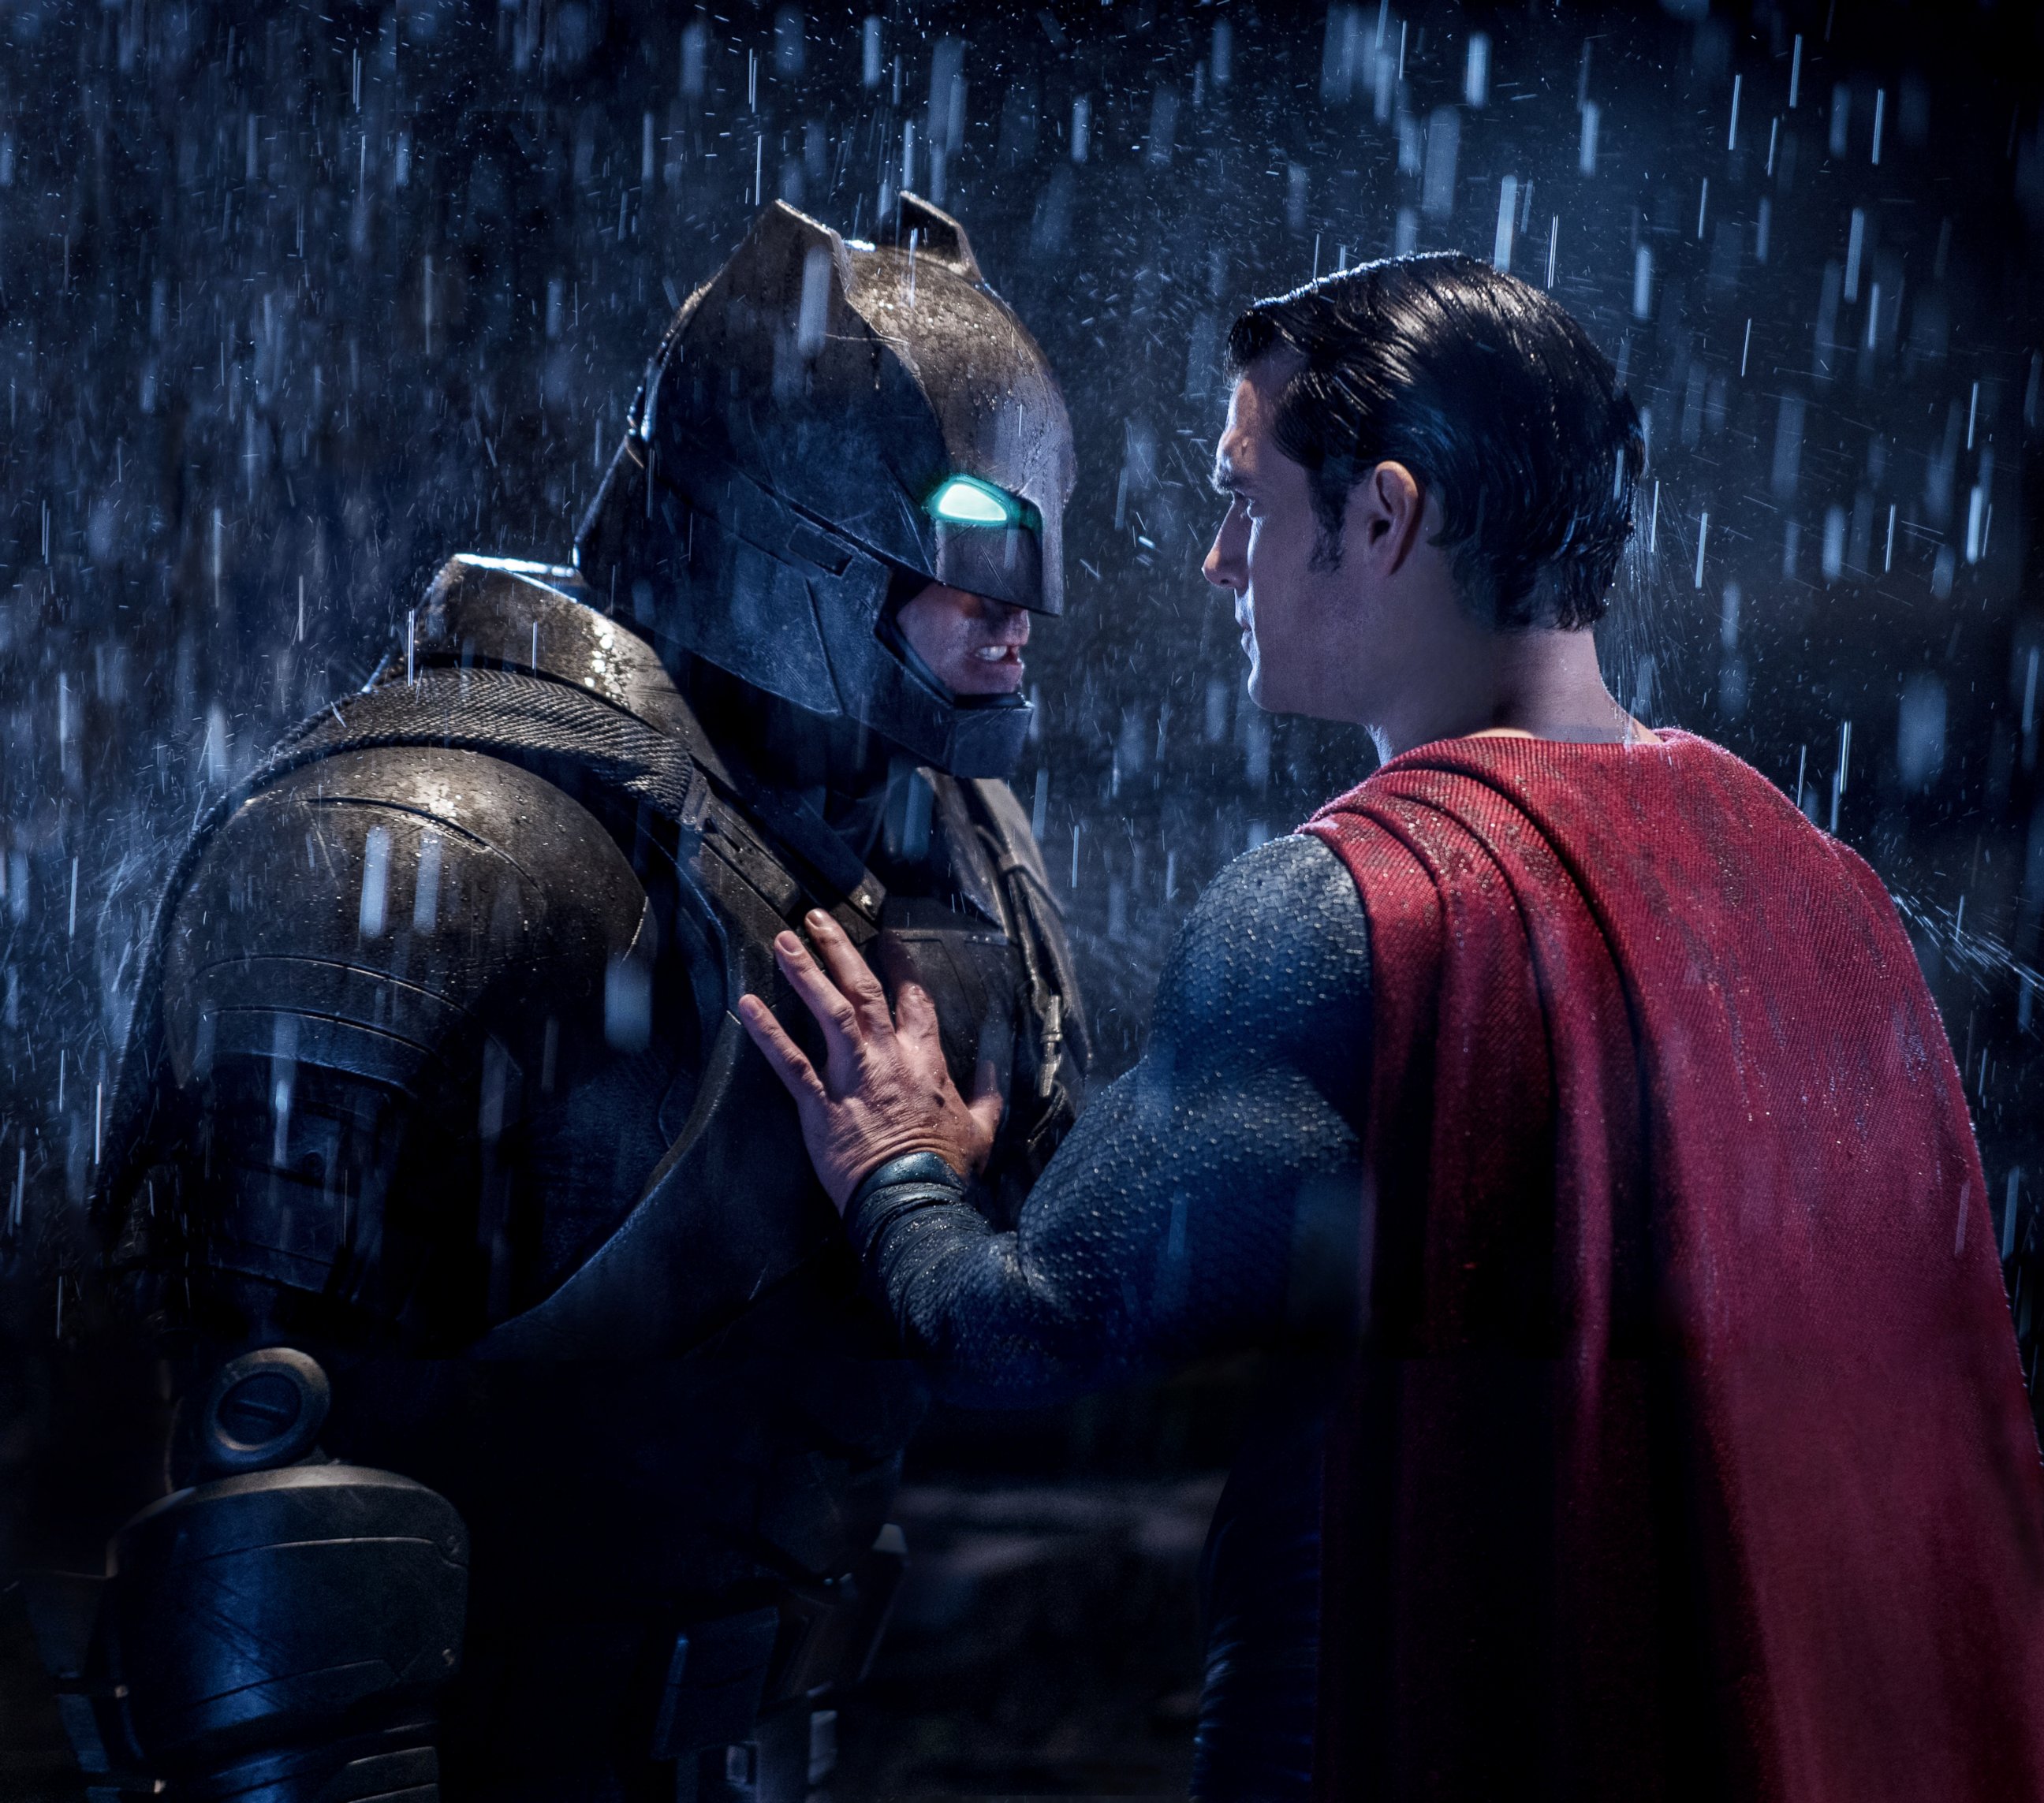 PHOTO: Batman and Superman are pictured in a production still from the film Batman v. Superman: Dawn of Justice.